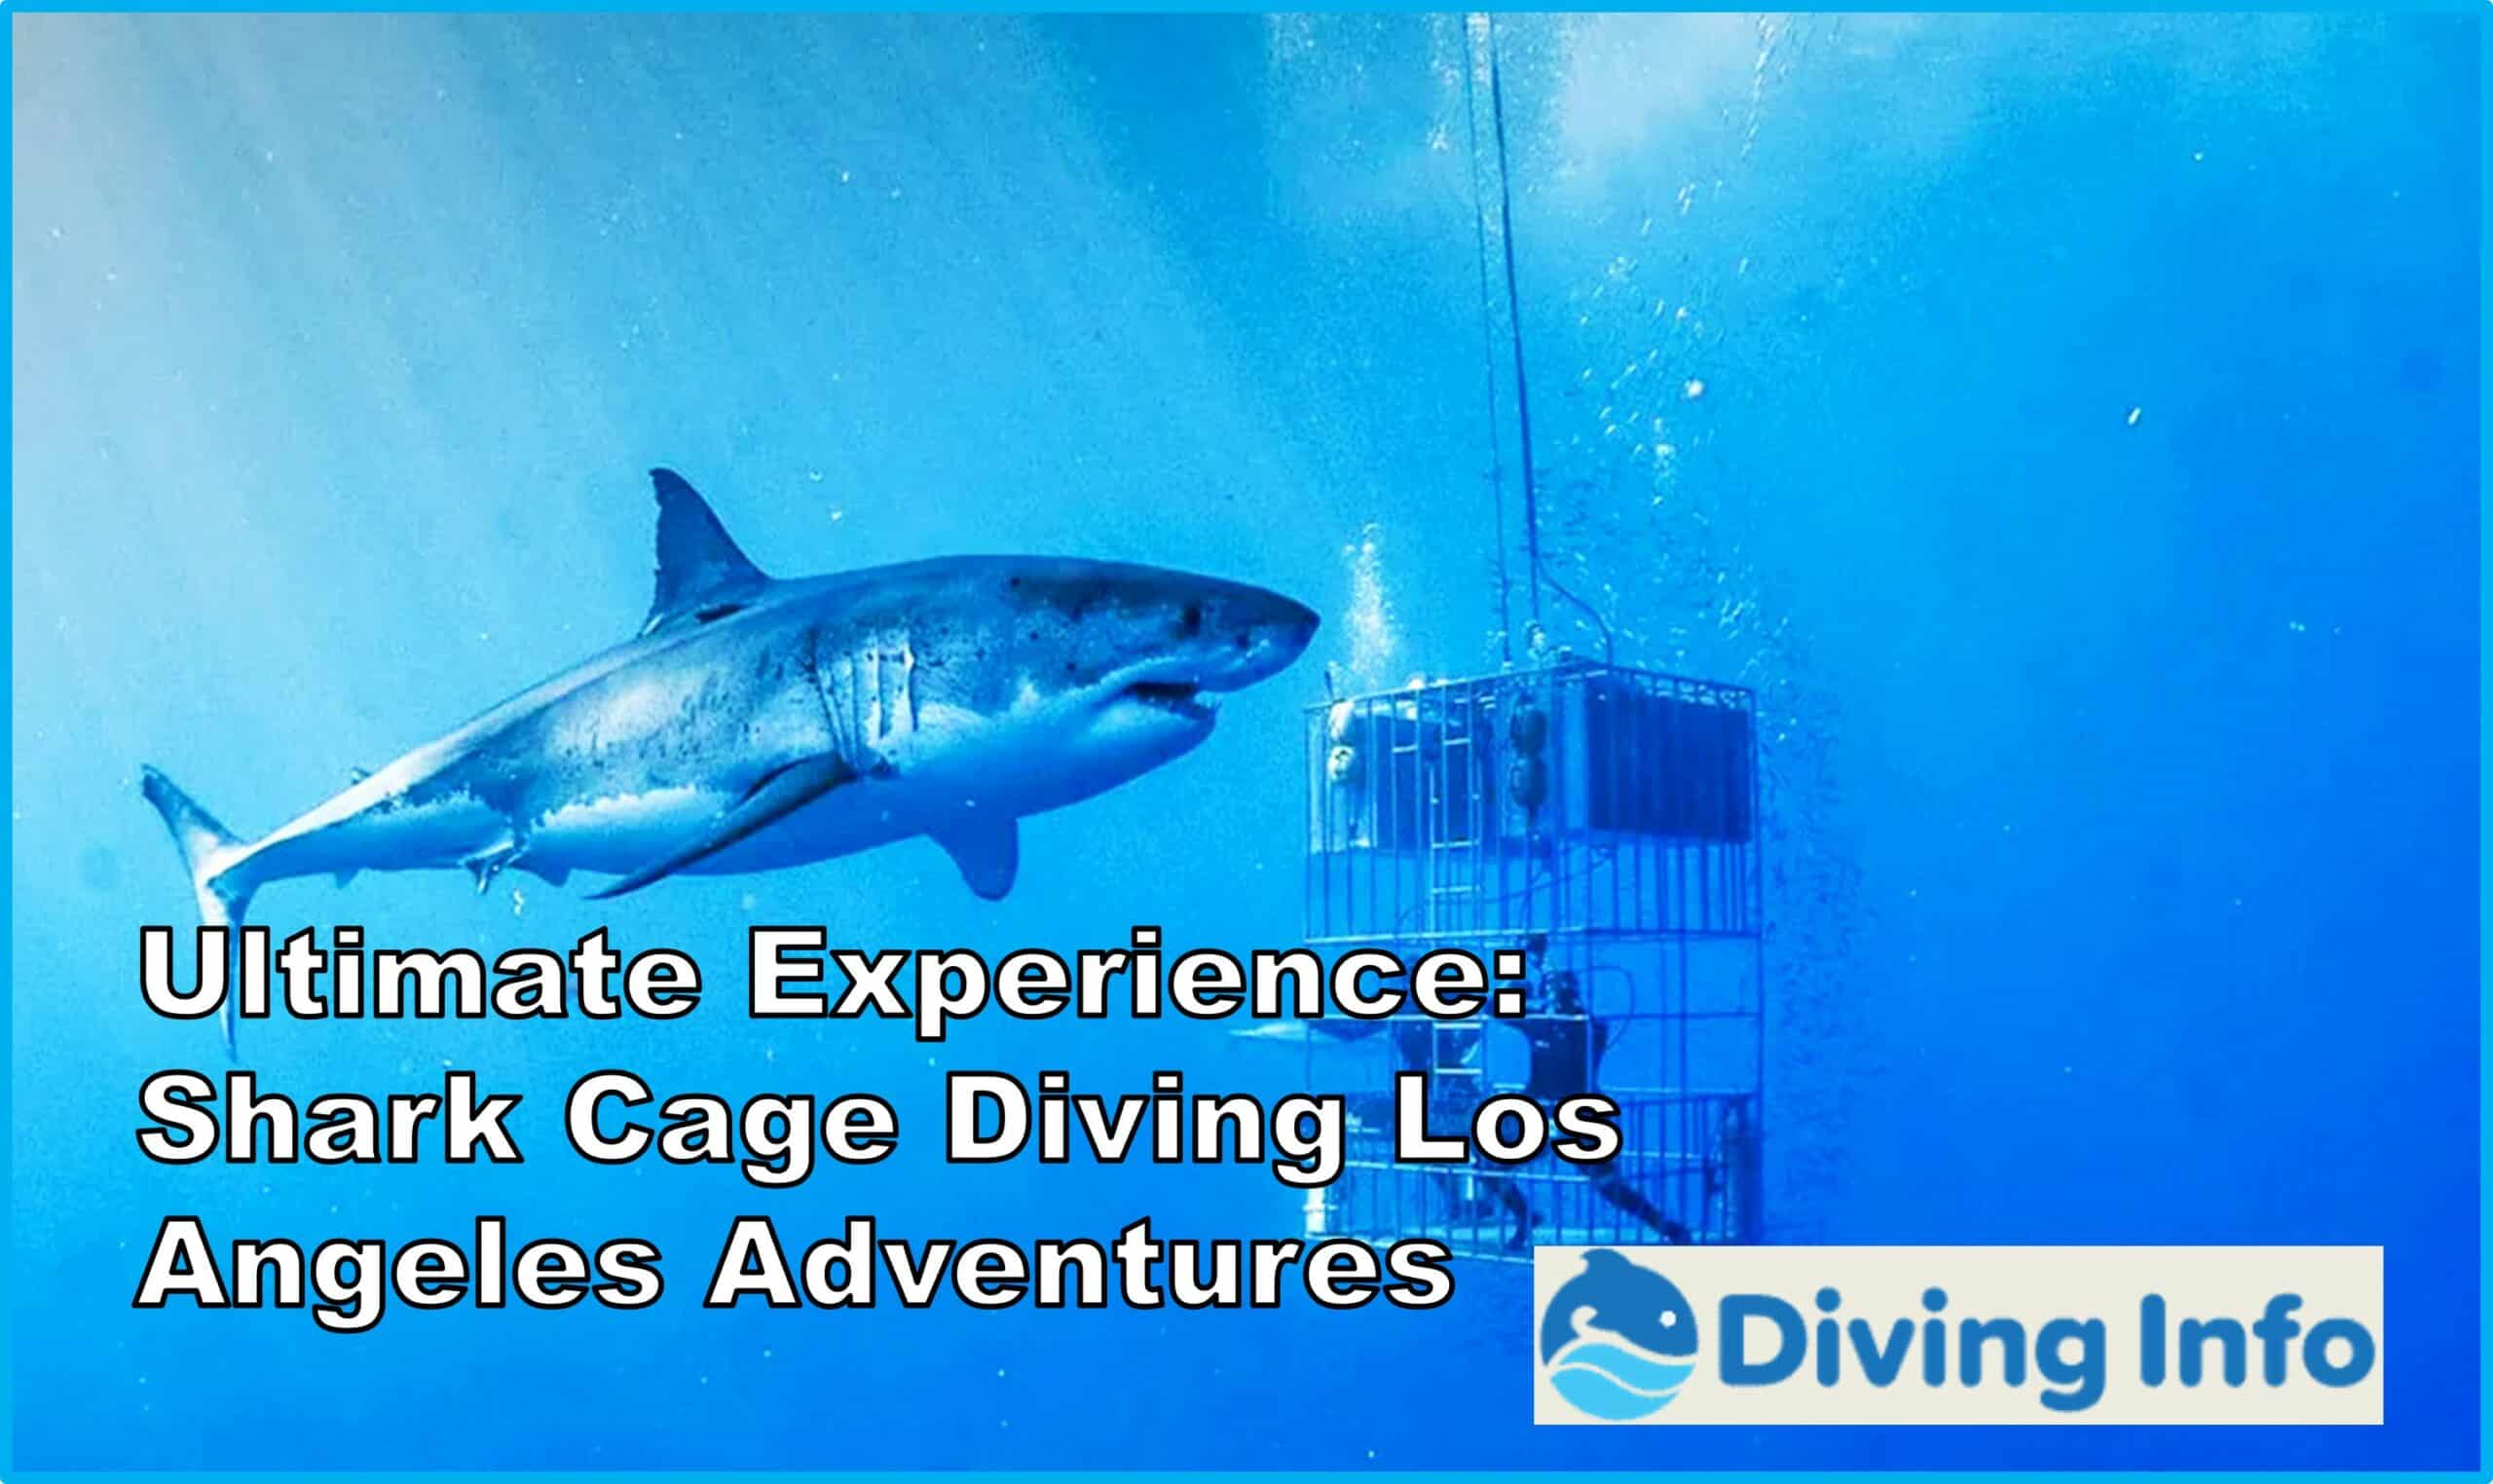 Ultimate Experience Shark Cage Diving Los Angeles Adventures